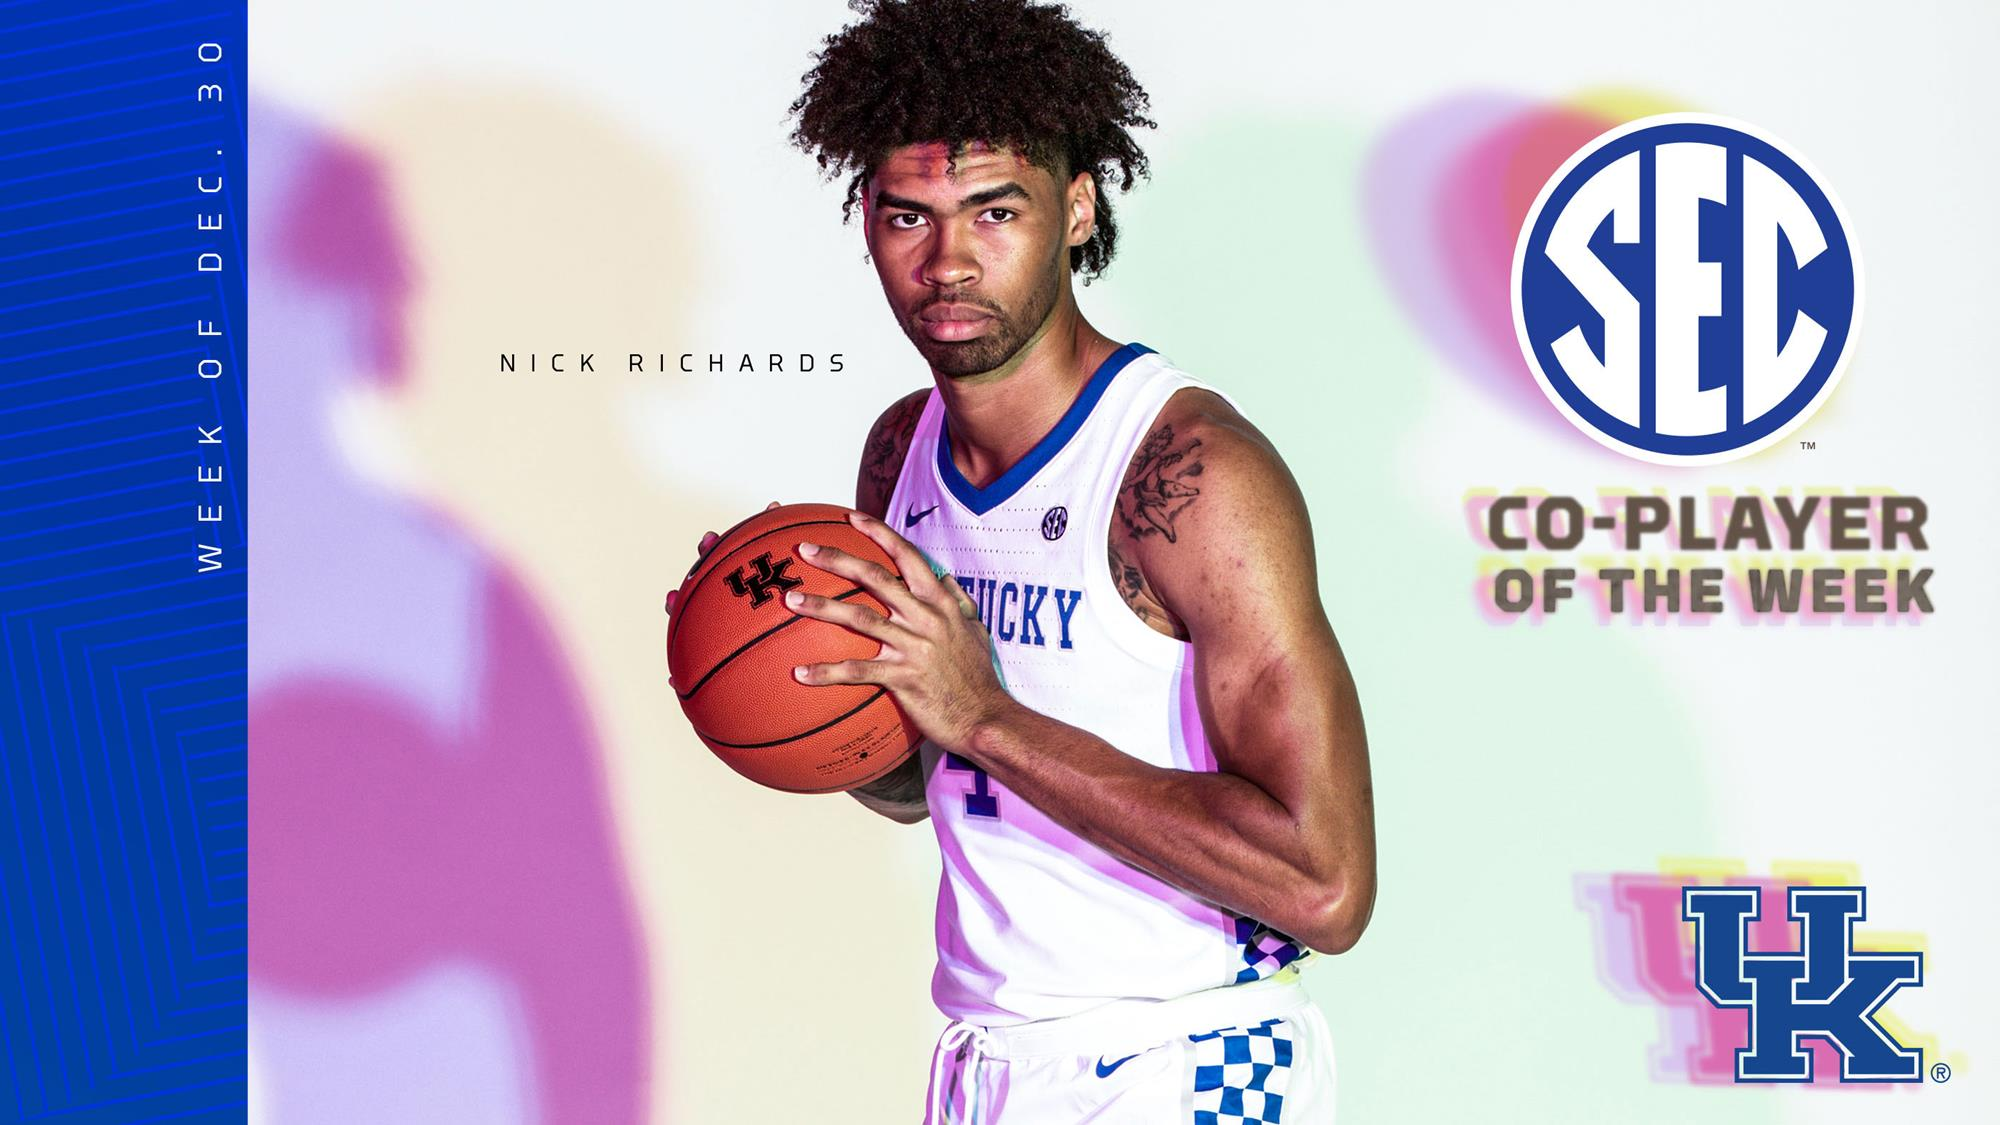 Richards, Maxey Win SEC, National Player of the Week Honors